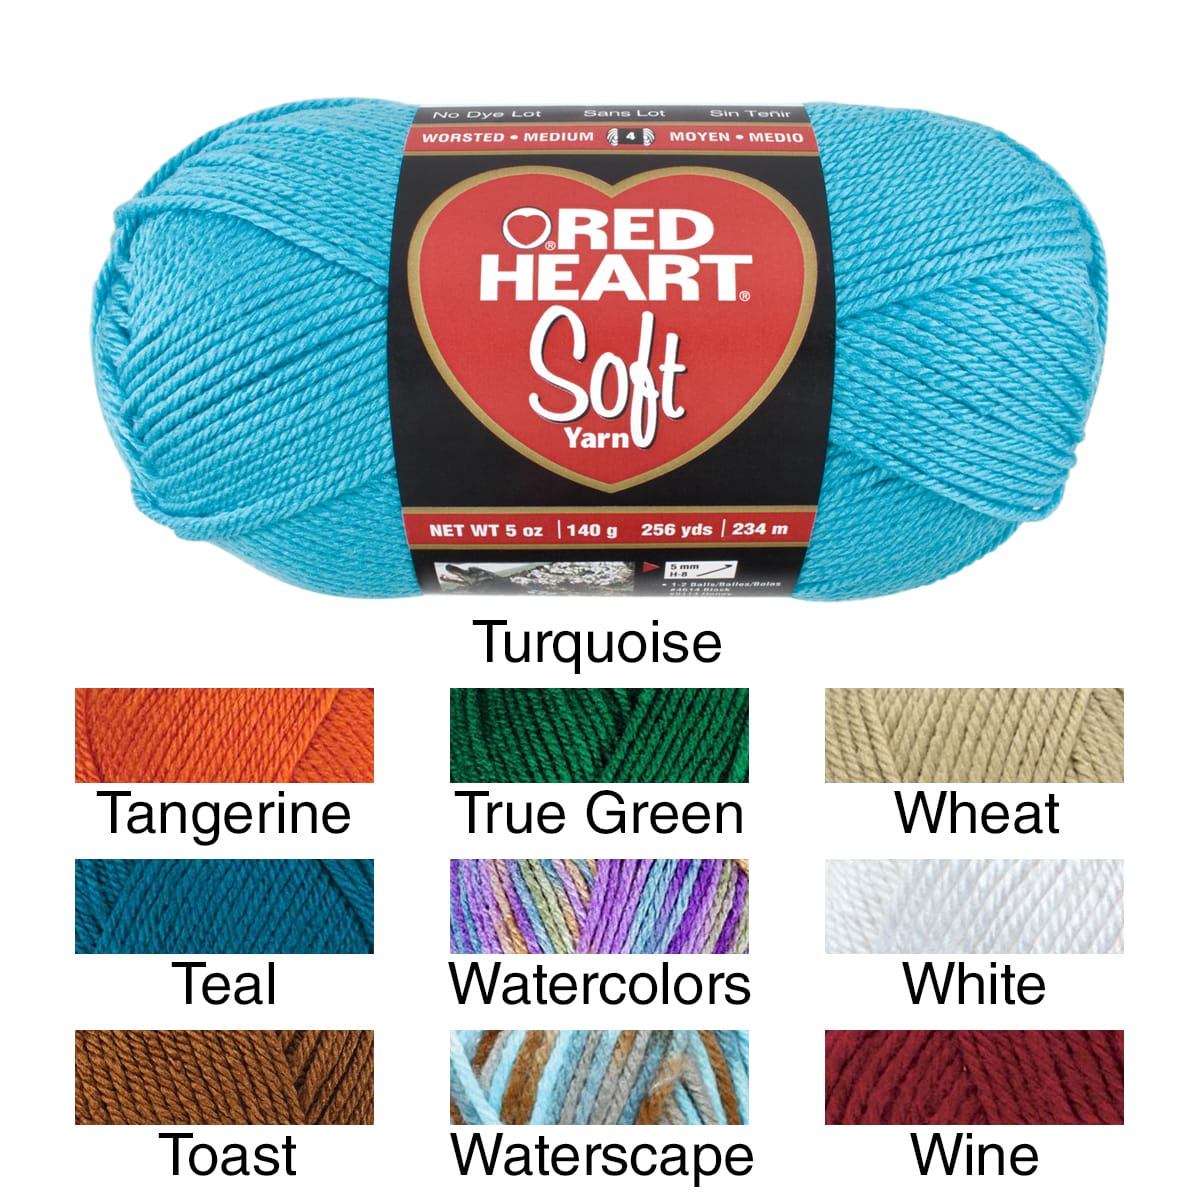 Red Heart Soft Yarn-Waterscape - image 2 of 2